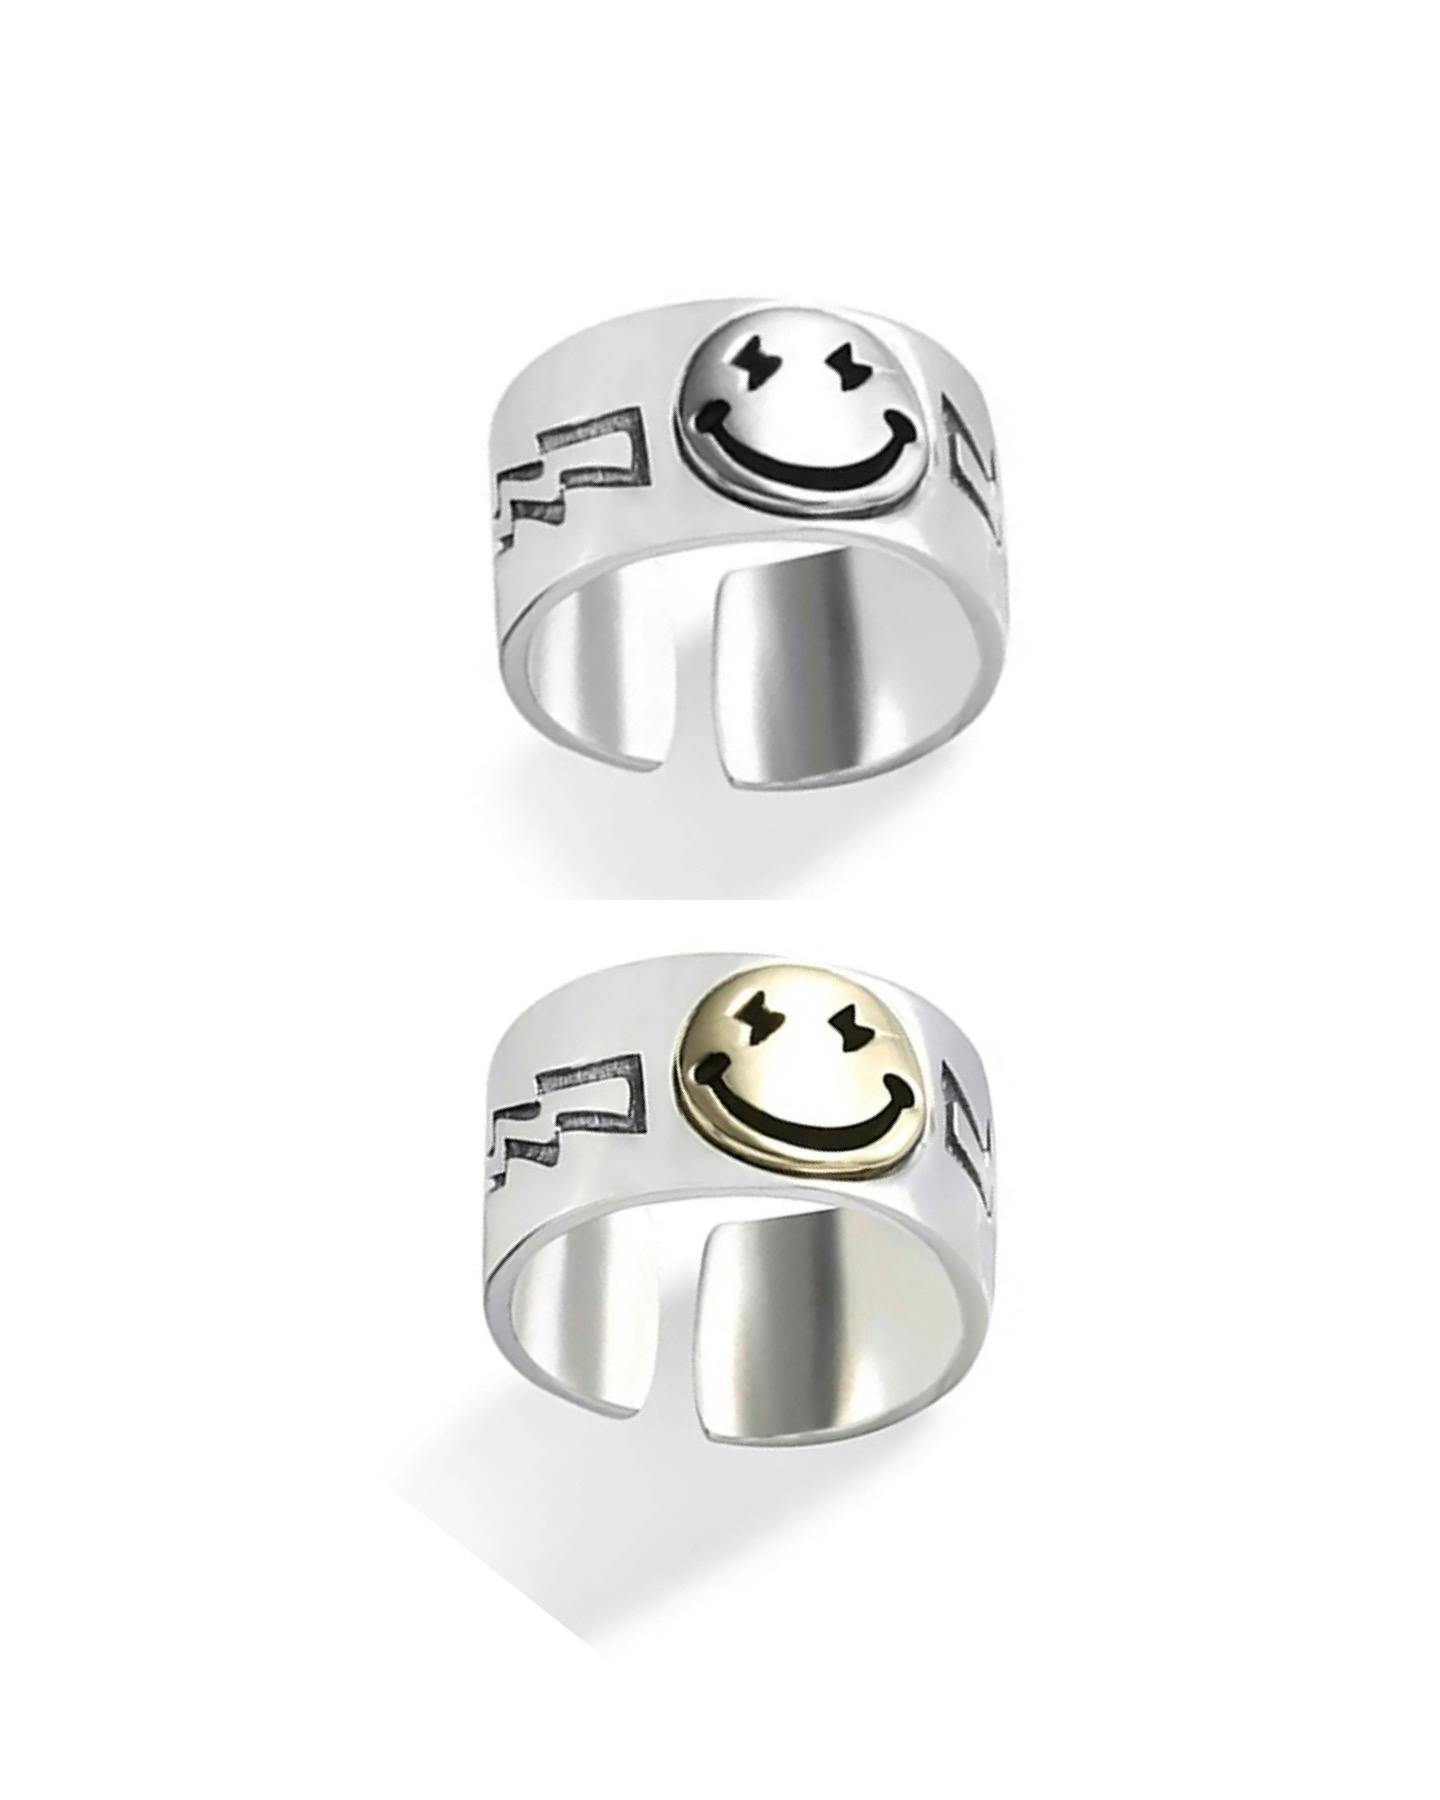 Ring chunky smiley